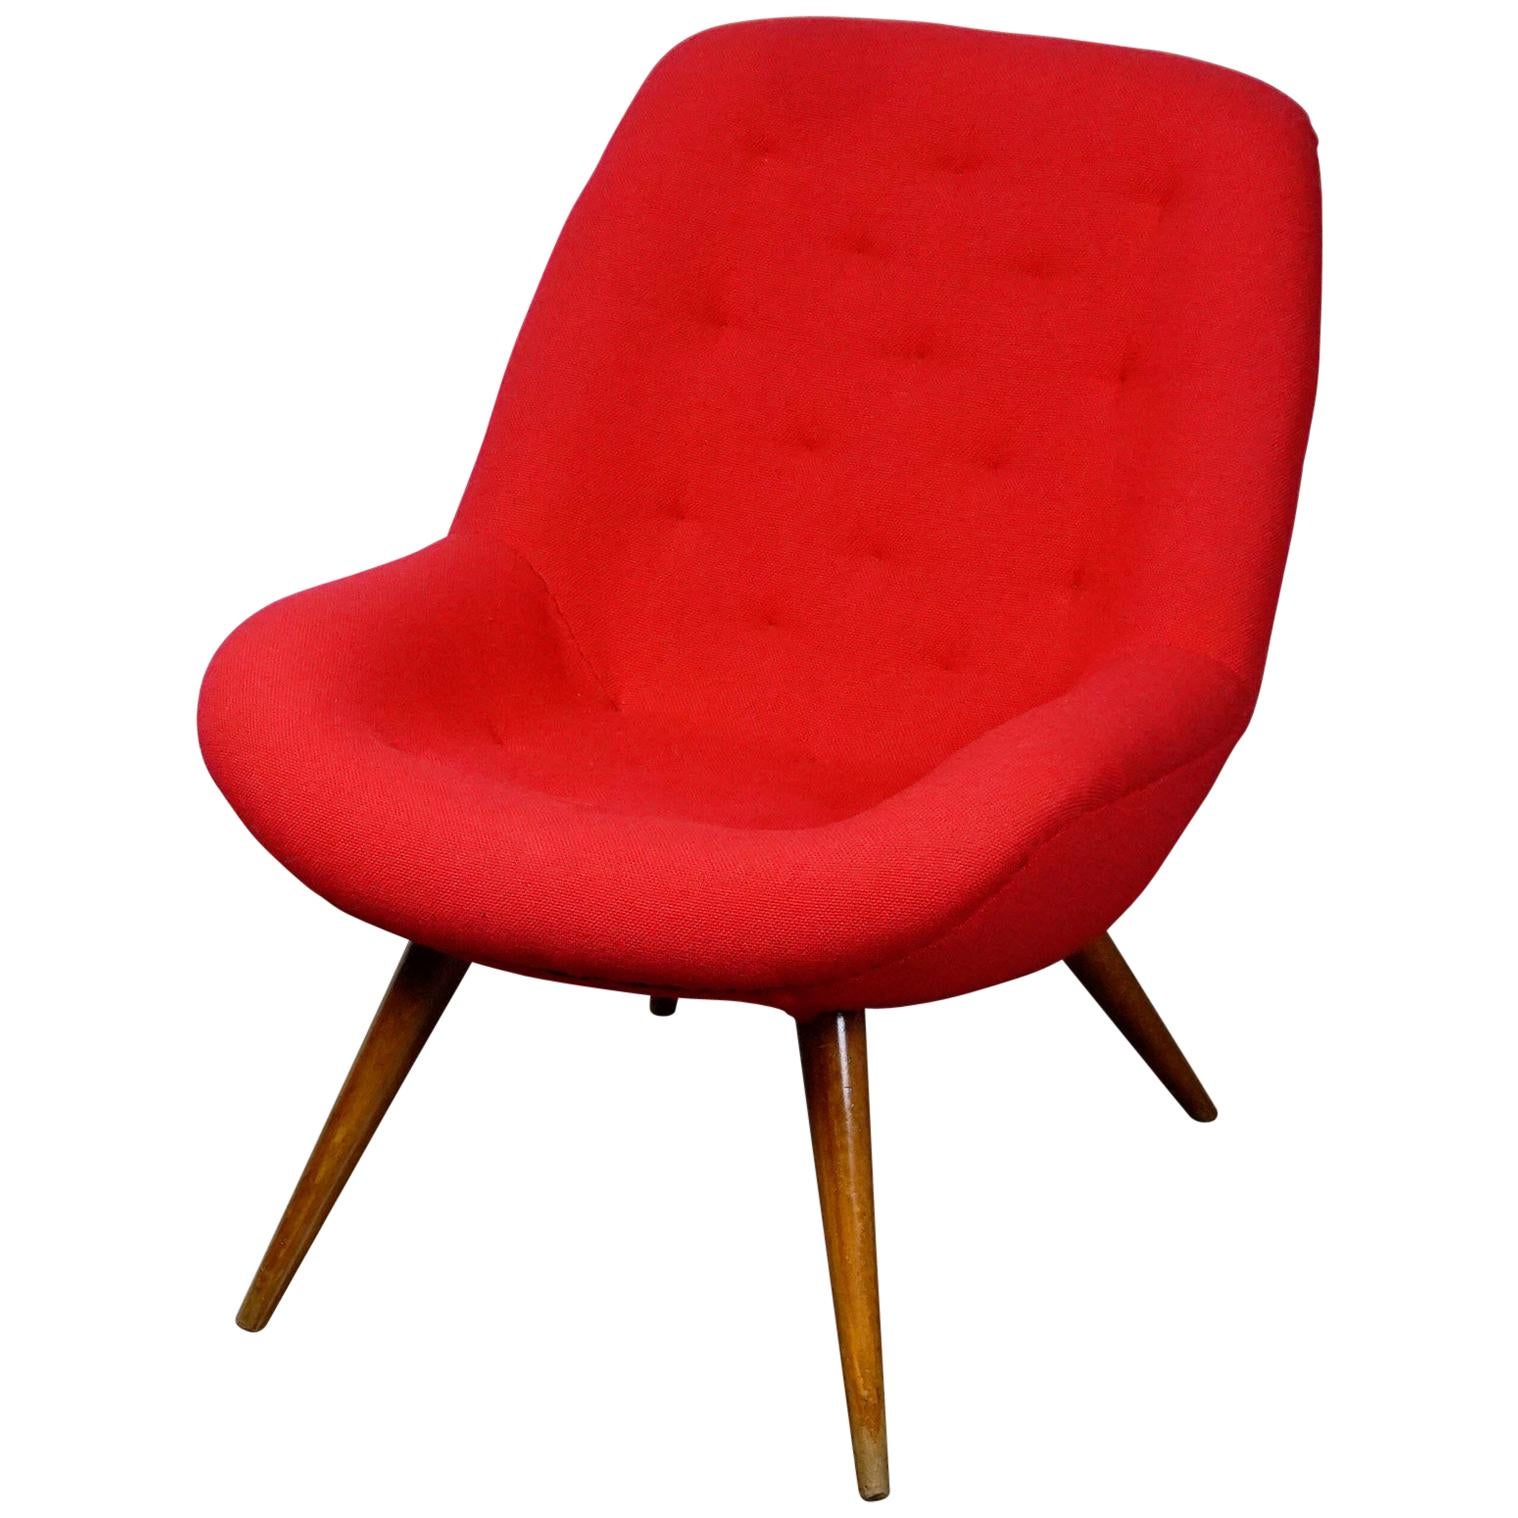 Austrian Midcentury Red Bucket Lounge or Cocktail Chair with Walnut Legs